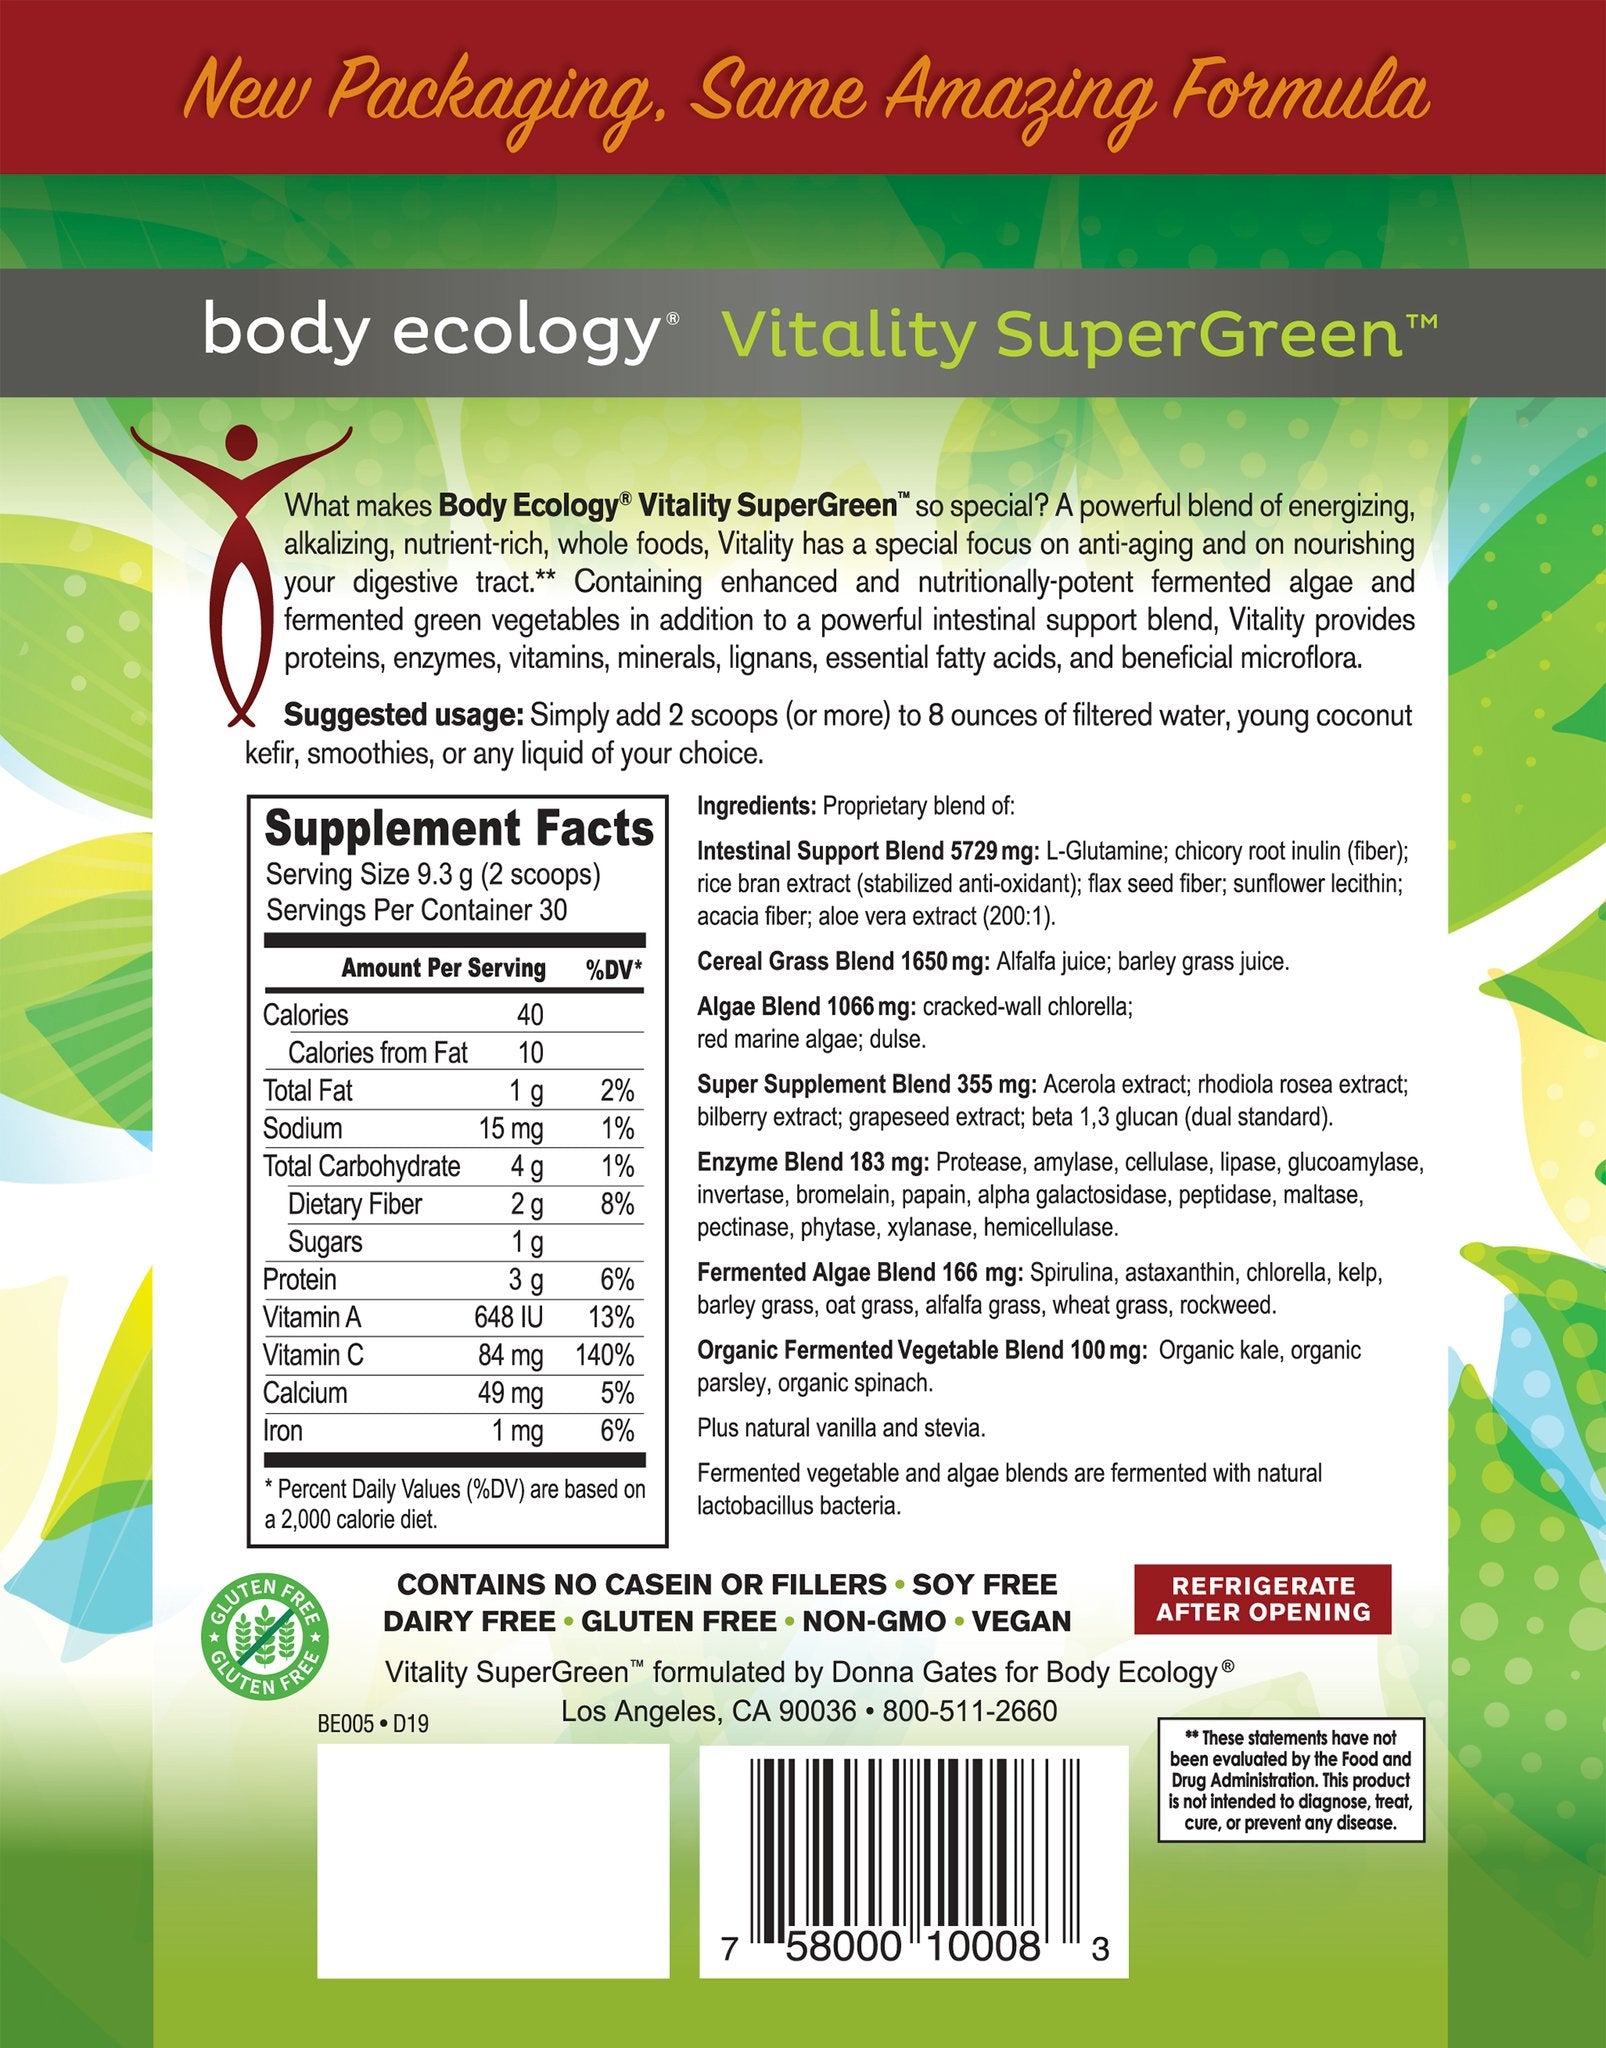 Body Ecology Vitality Super Green Fermented Probiotic Drink Energy lose weight fast delivery Australia Nourishing Ecology